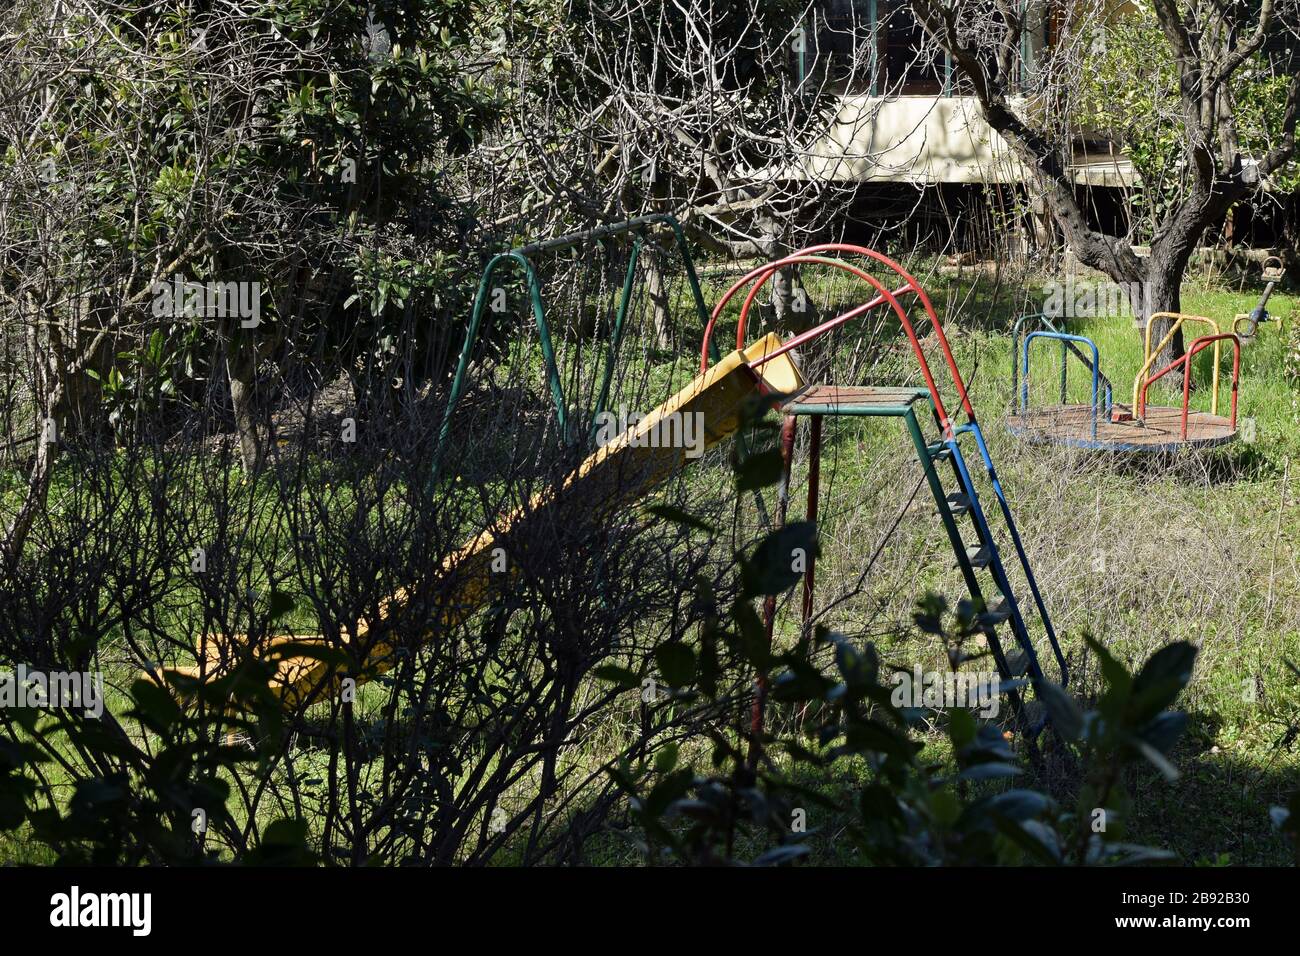 Swings slides and merry go round in abandoned overgrown childrens playground. Stock Photo